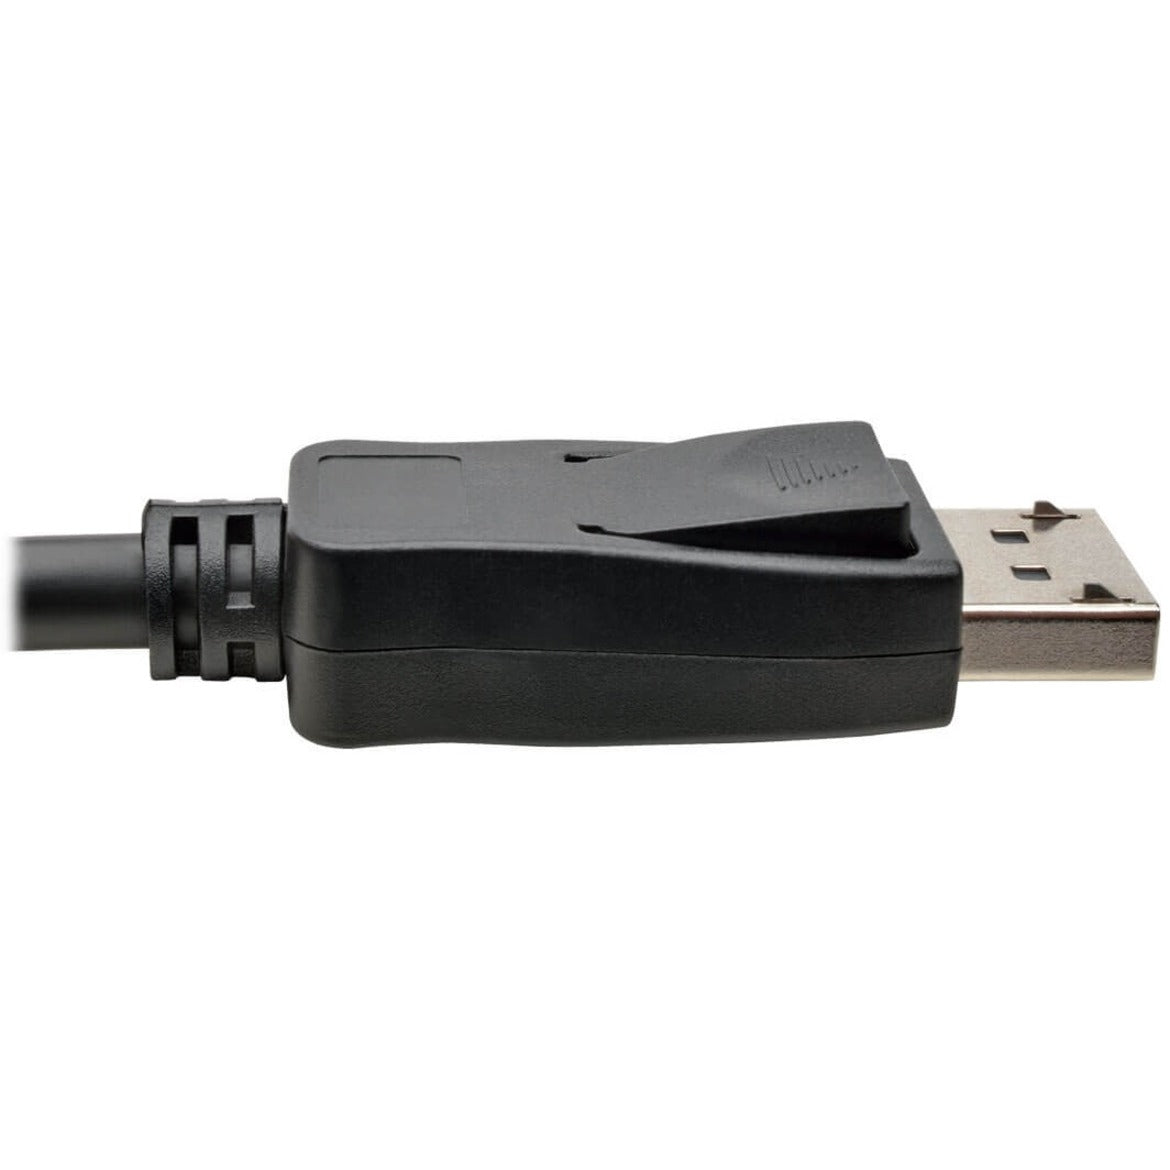 Tripp Lite P582-006-HD-V2A DisplayPort 1.2a to HDMI Active Adapter Cable (M/M), 6 ft.